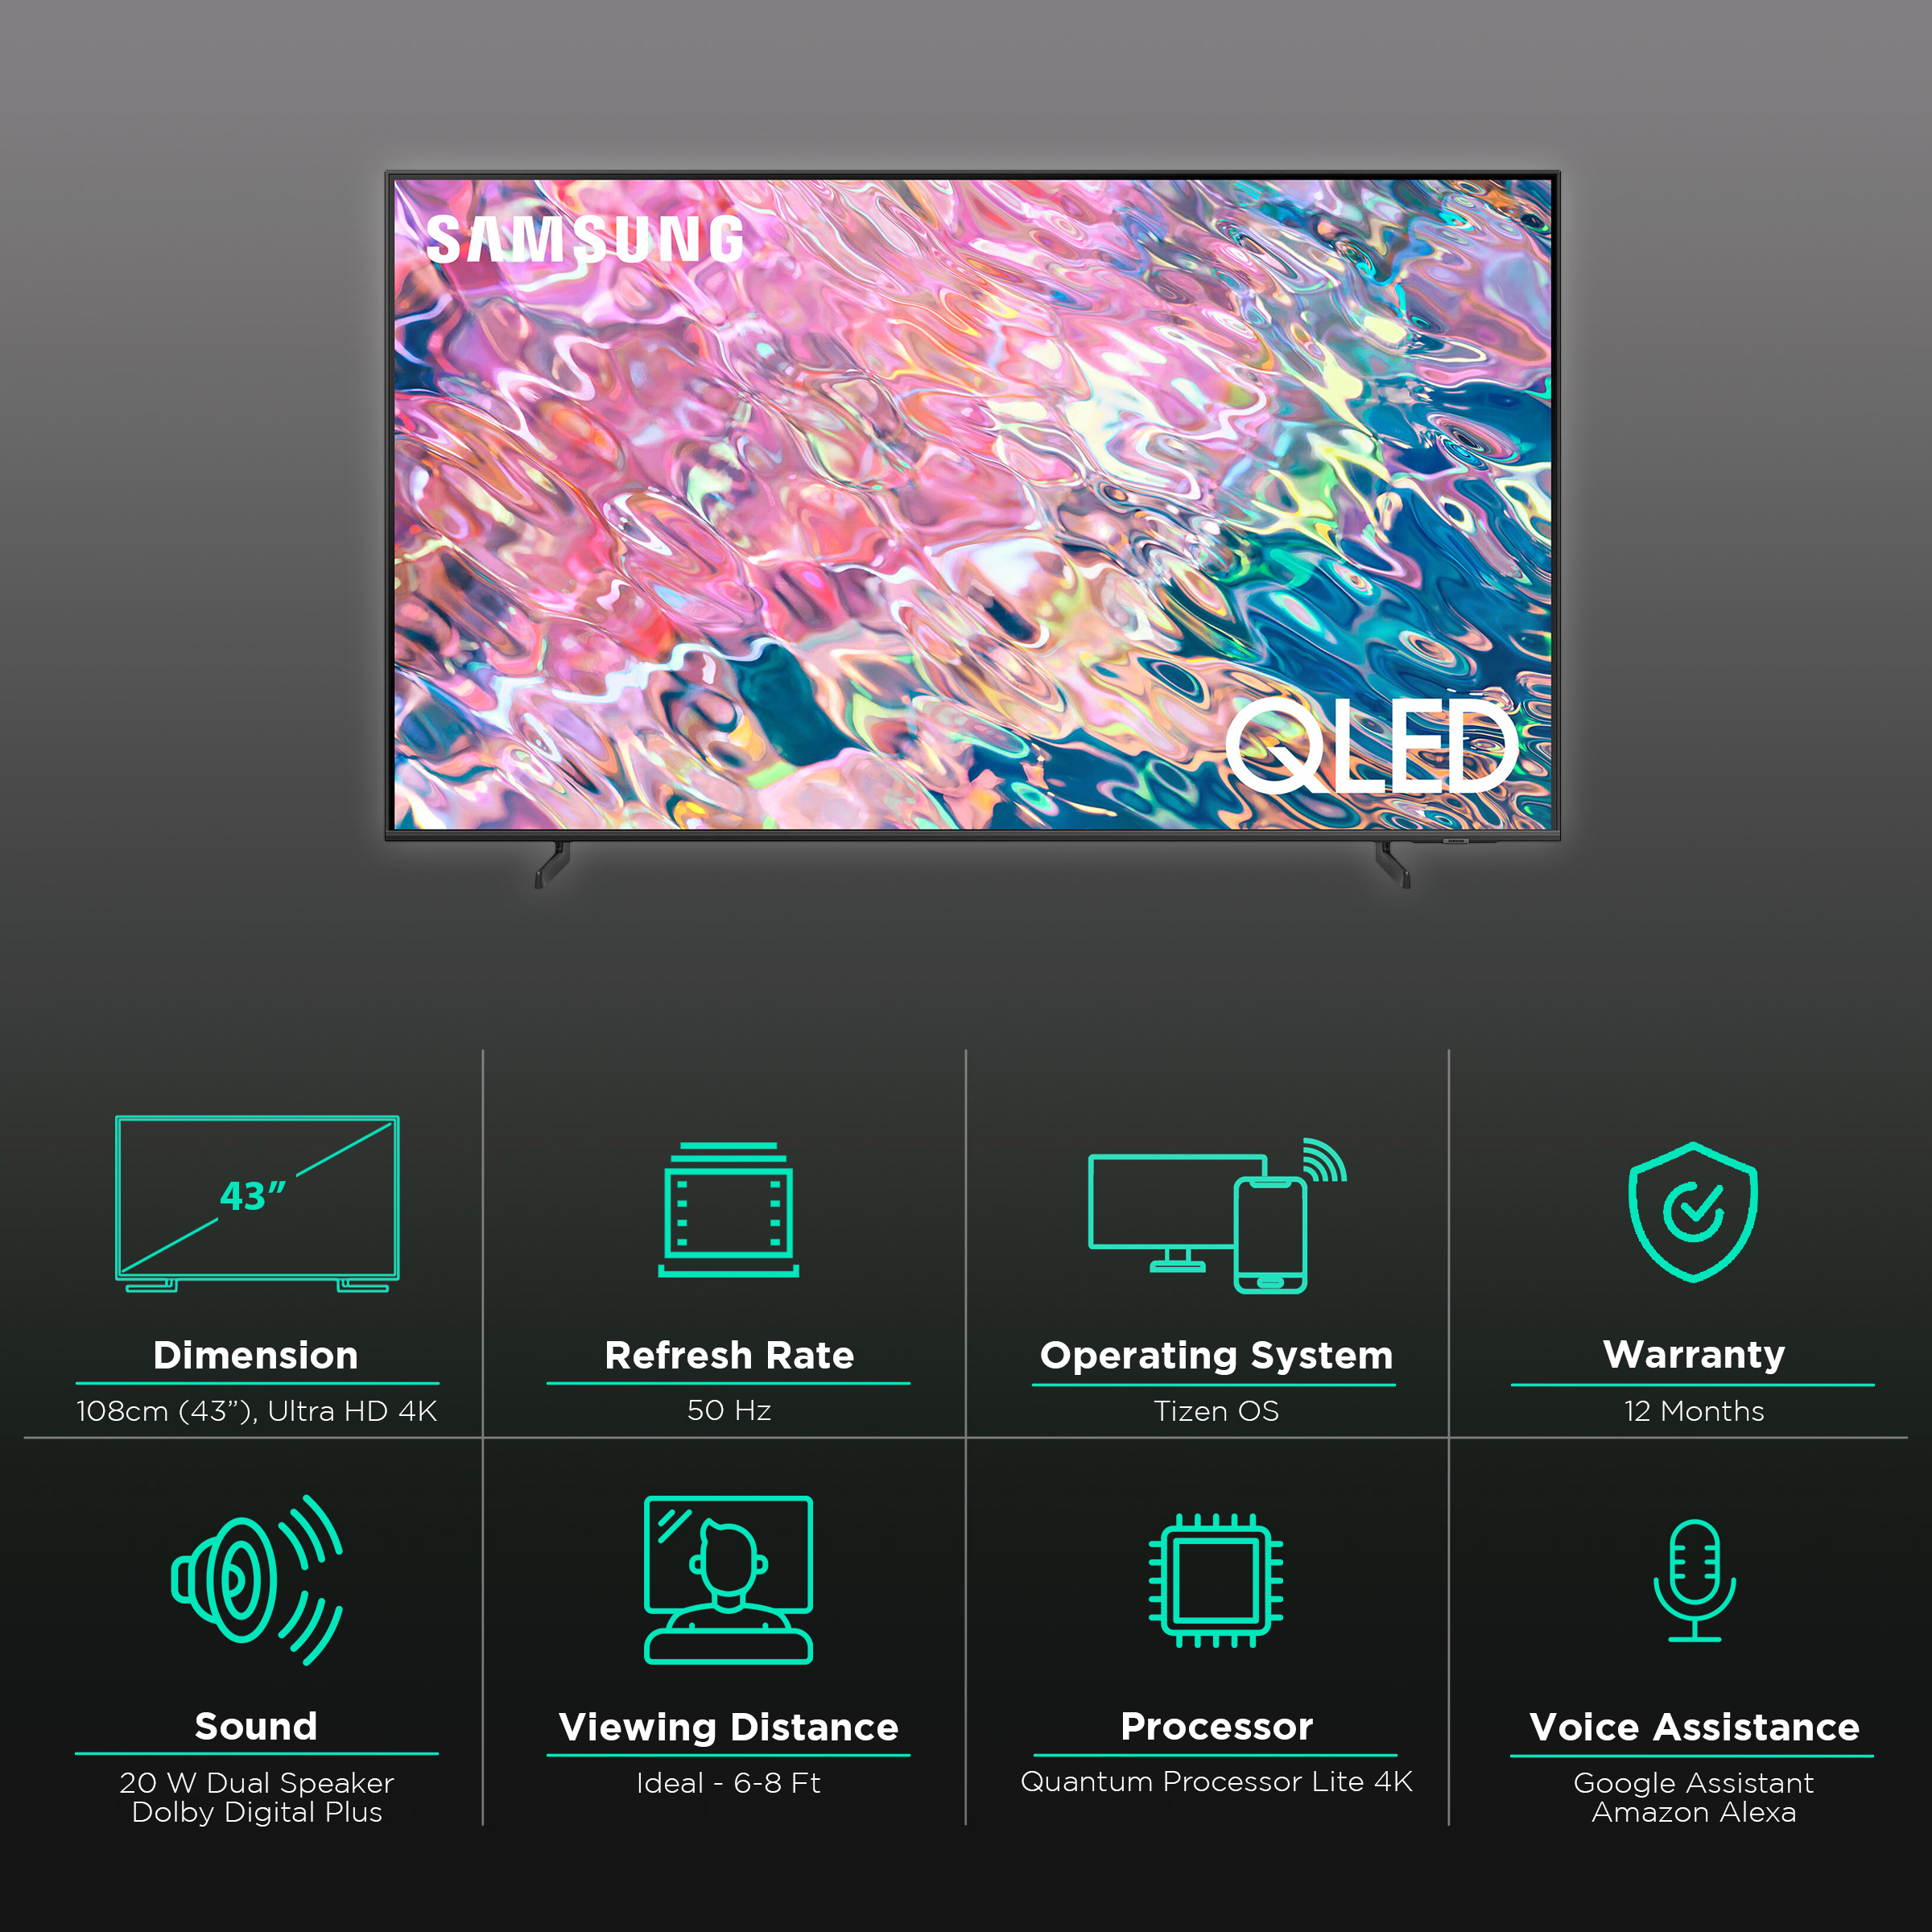 SAMSUNG Series 6 108 cm (43 inch) QLED 4K Ultra HD Tizen TV with Alexa Compatibility_3